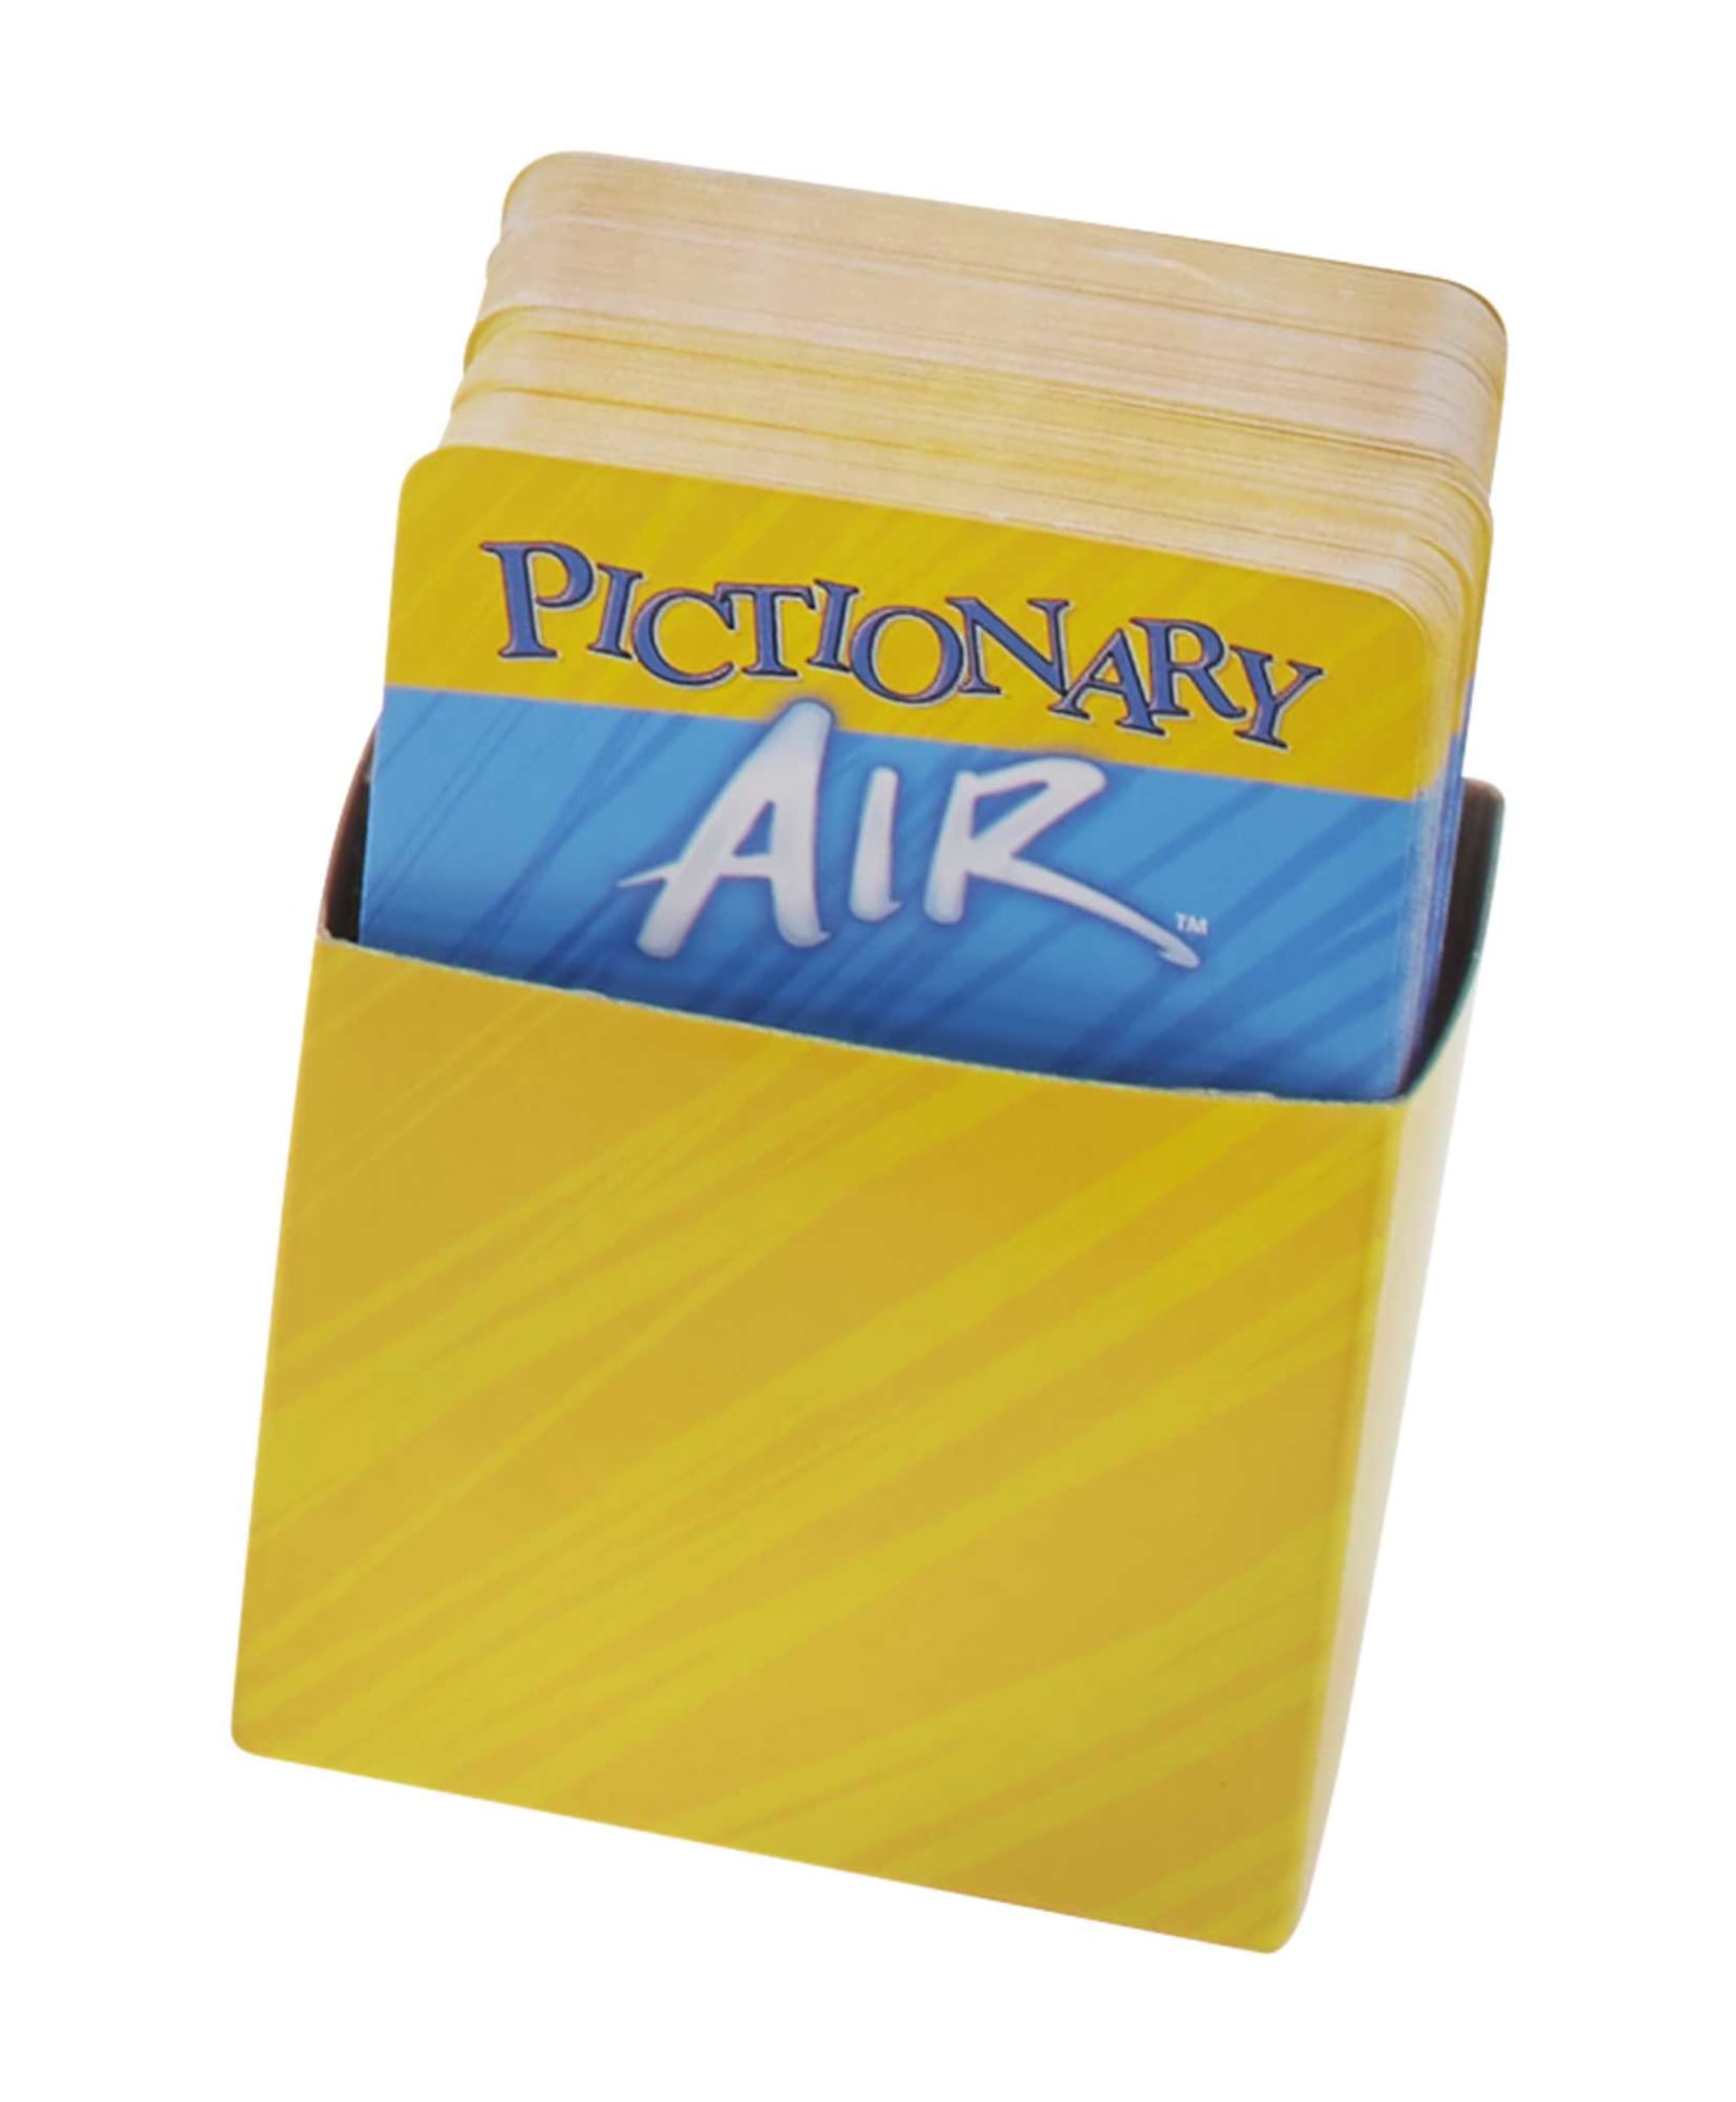 Check out the New Pictionary Air from Mattel!  Love the game pictionary?  Up the challenge level with the new Pictionary Air from Mattel! You draw in  the air, but only your